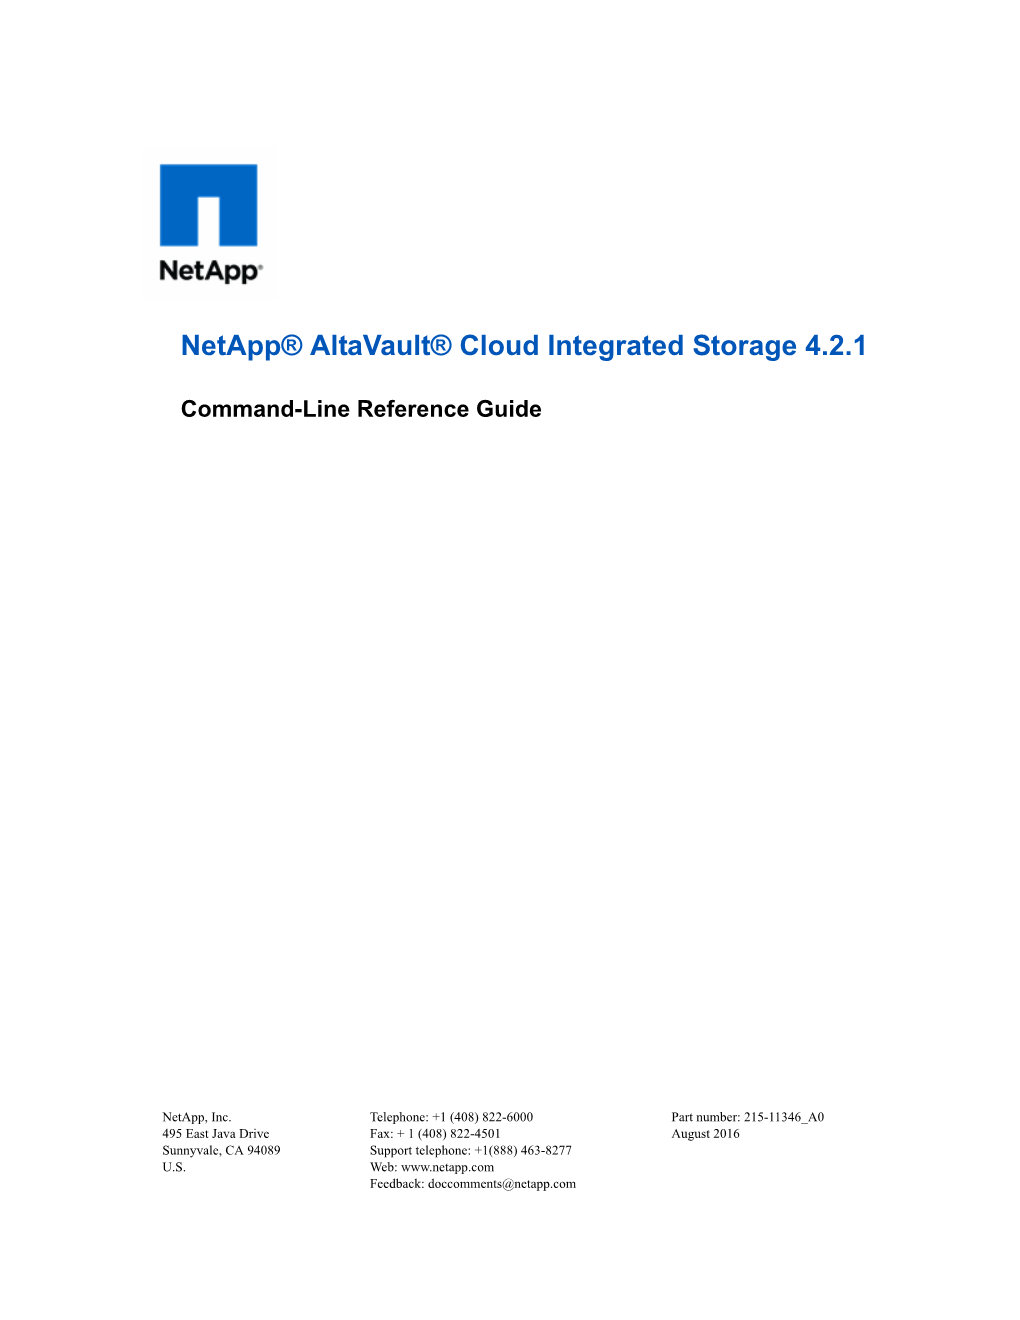 Altavault Cloud Integrated Storage Command-Line Reference Guide